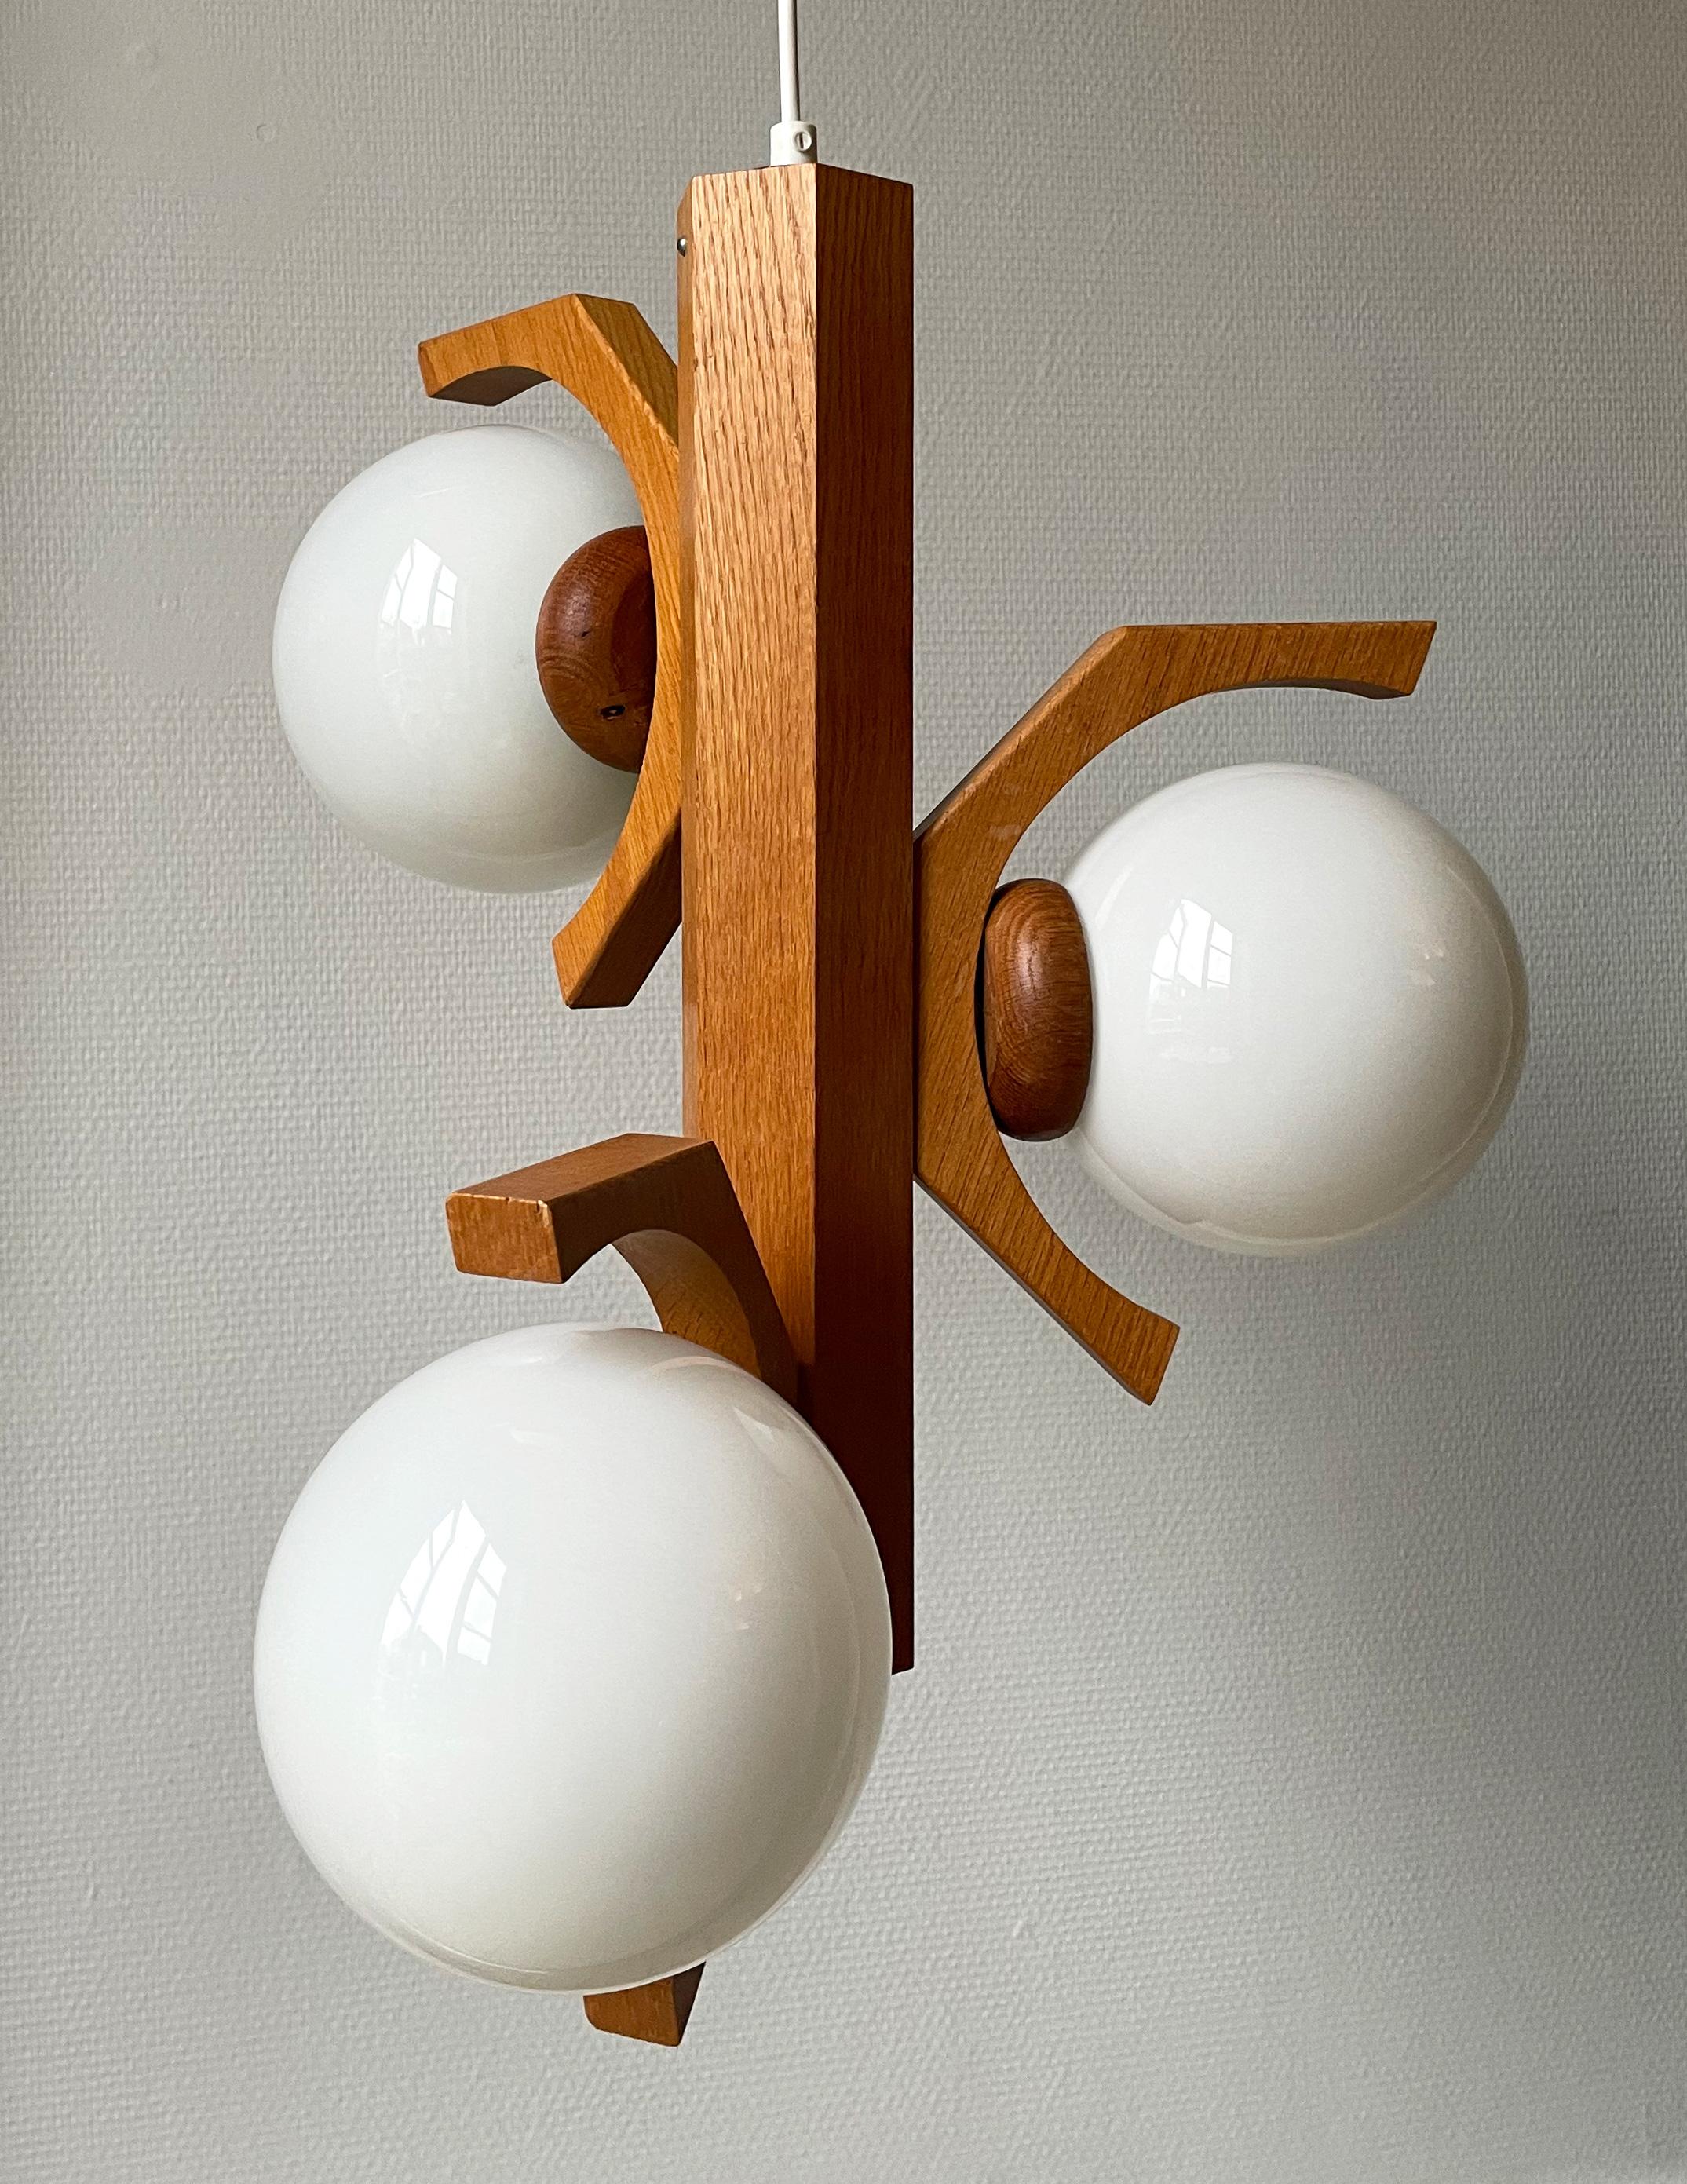 Vintage organic modern sculptural chandelier. Oak wood mount with three arms holding three milky white glass globes. Manufactured by Bony Design in the Netherlands in the early 1970s. Rewired and in great vintage condition with few signs of wear on